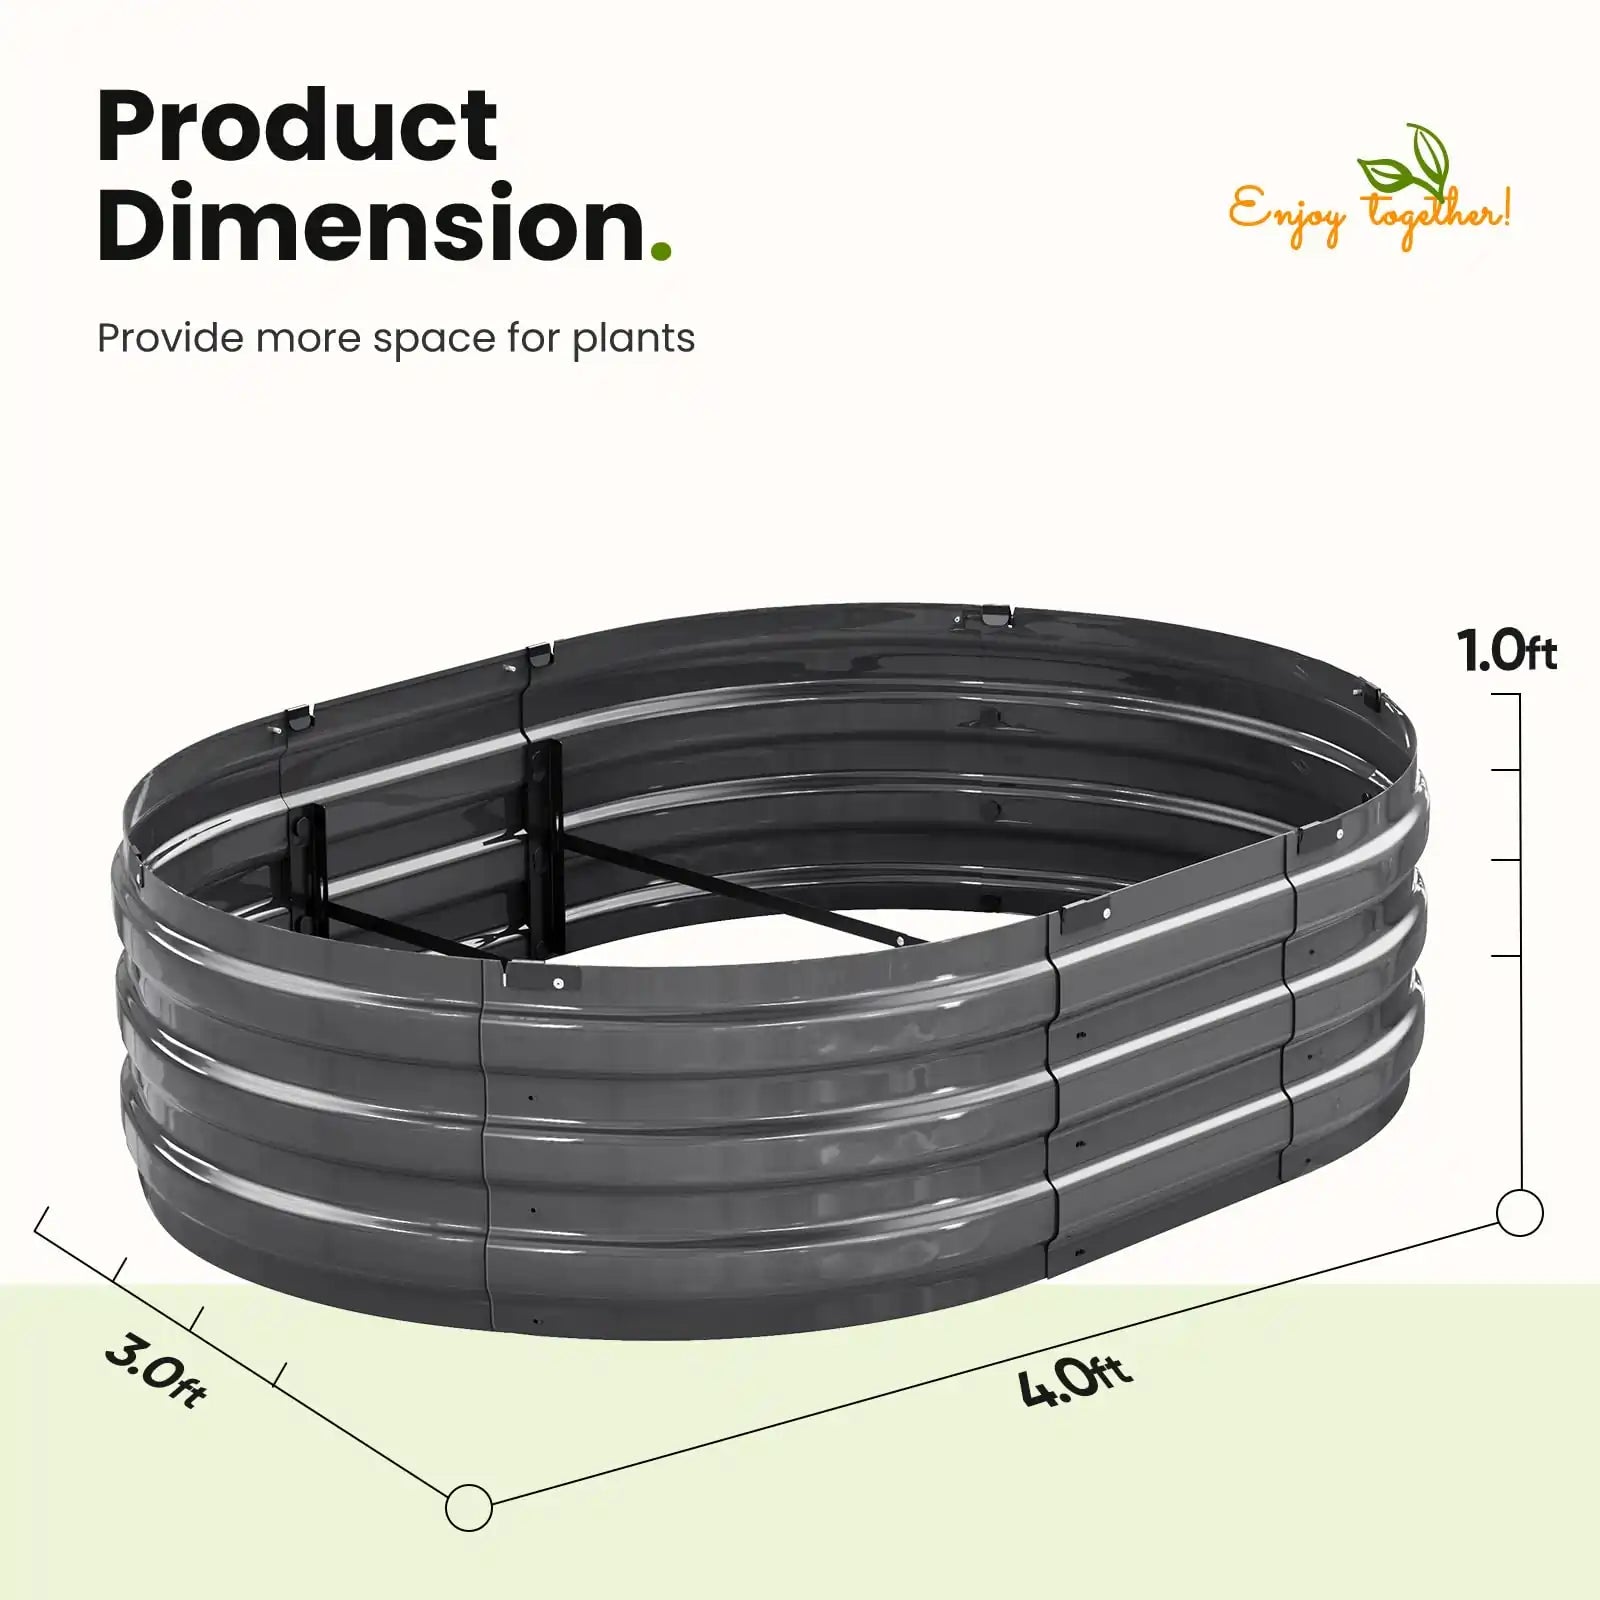 4x3x1 ft Screwless Raised Garden Bed product dimension#size_4x3x1ft